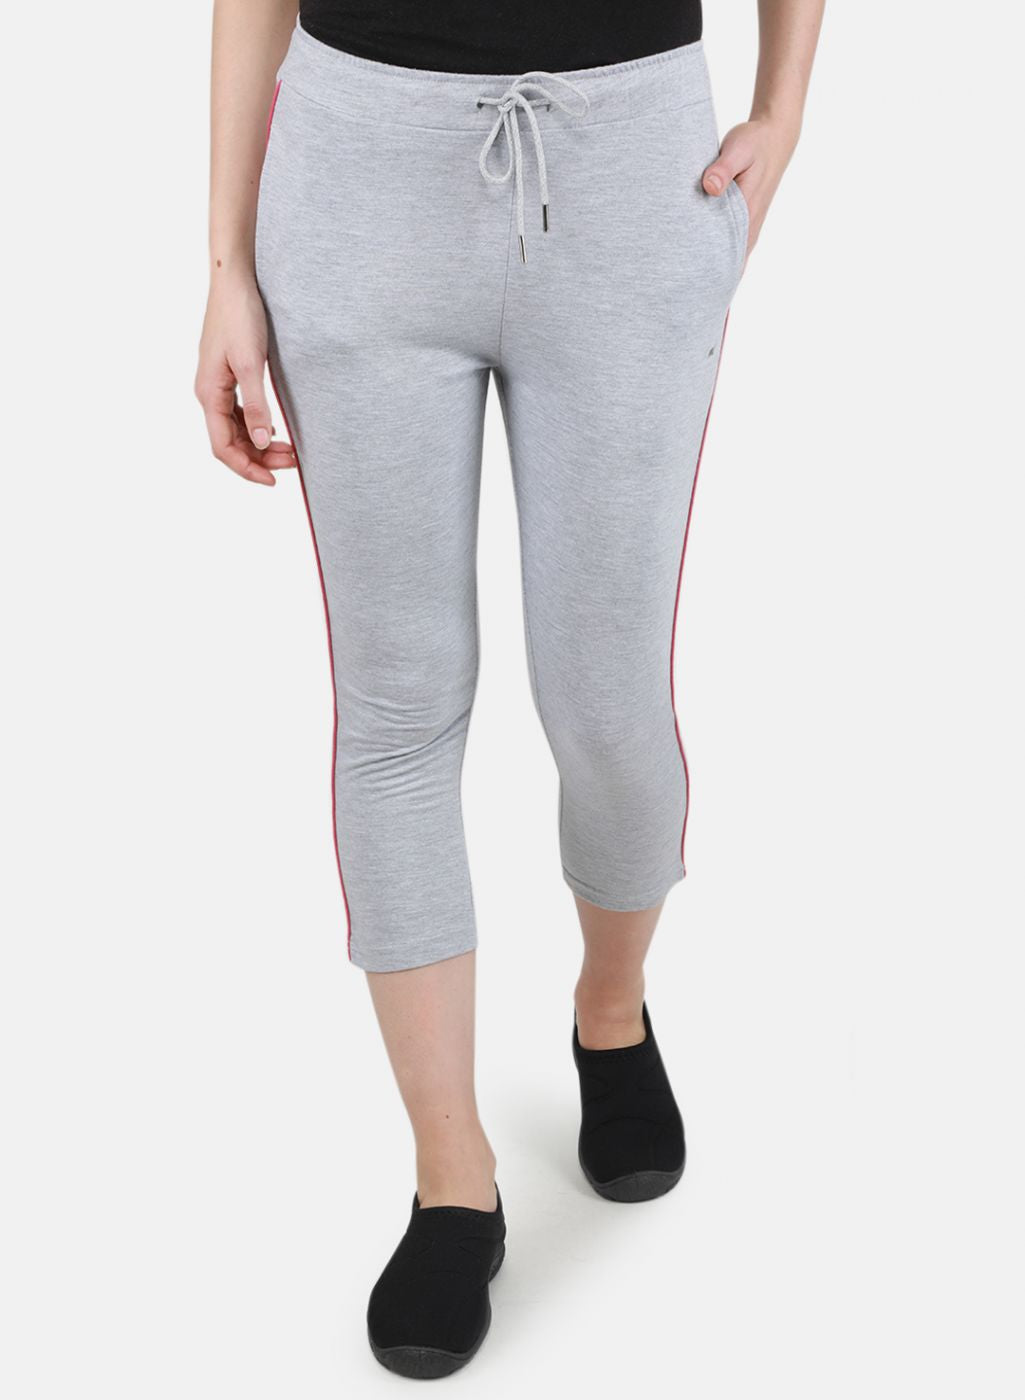 Capris For Girls - Buy Girls Capris Online in India At Best Prices 